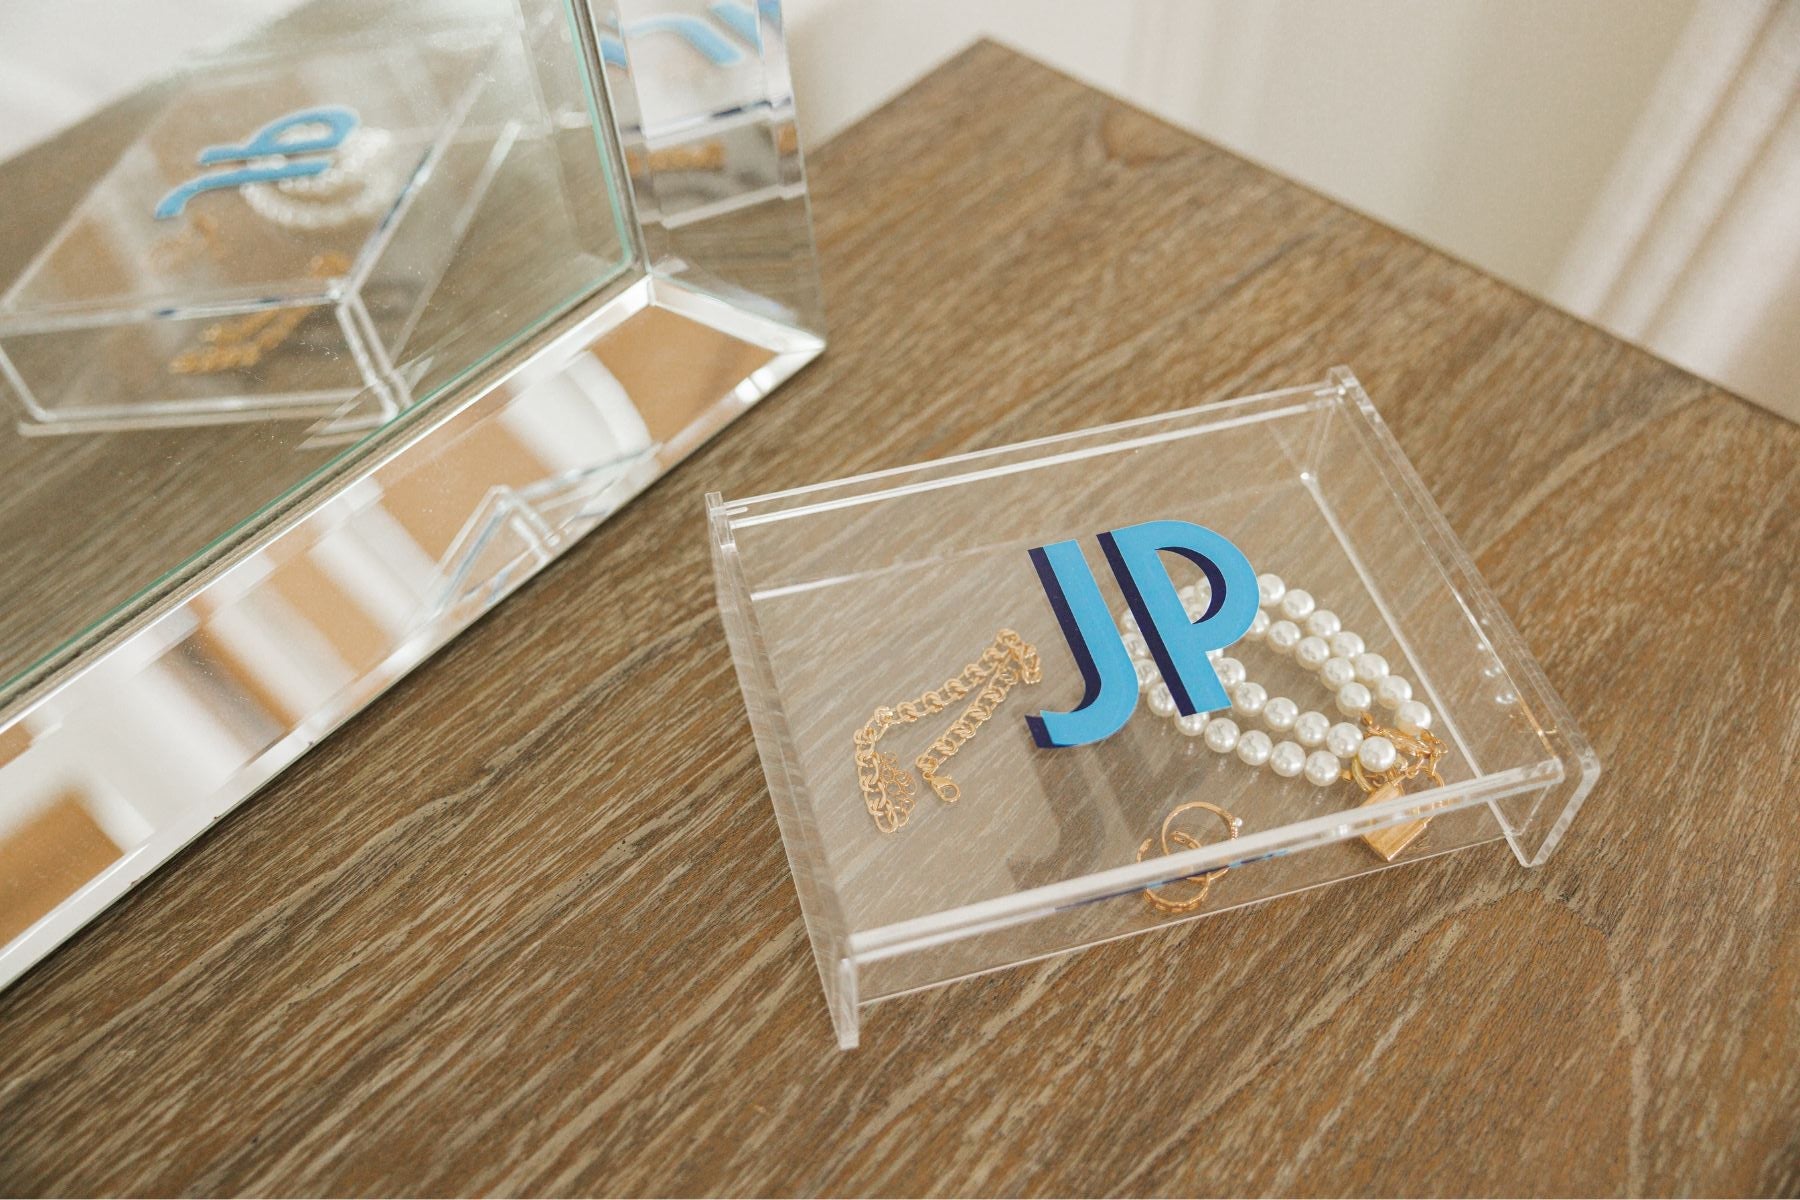 An acrylic catchall box is customized with a pink monogram.